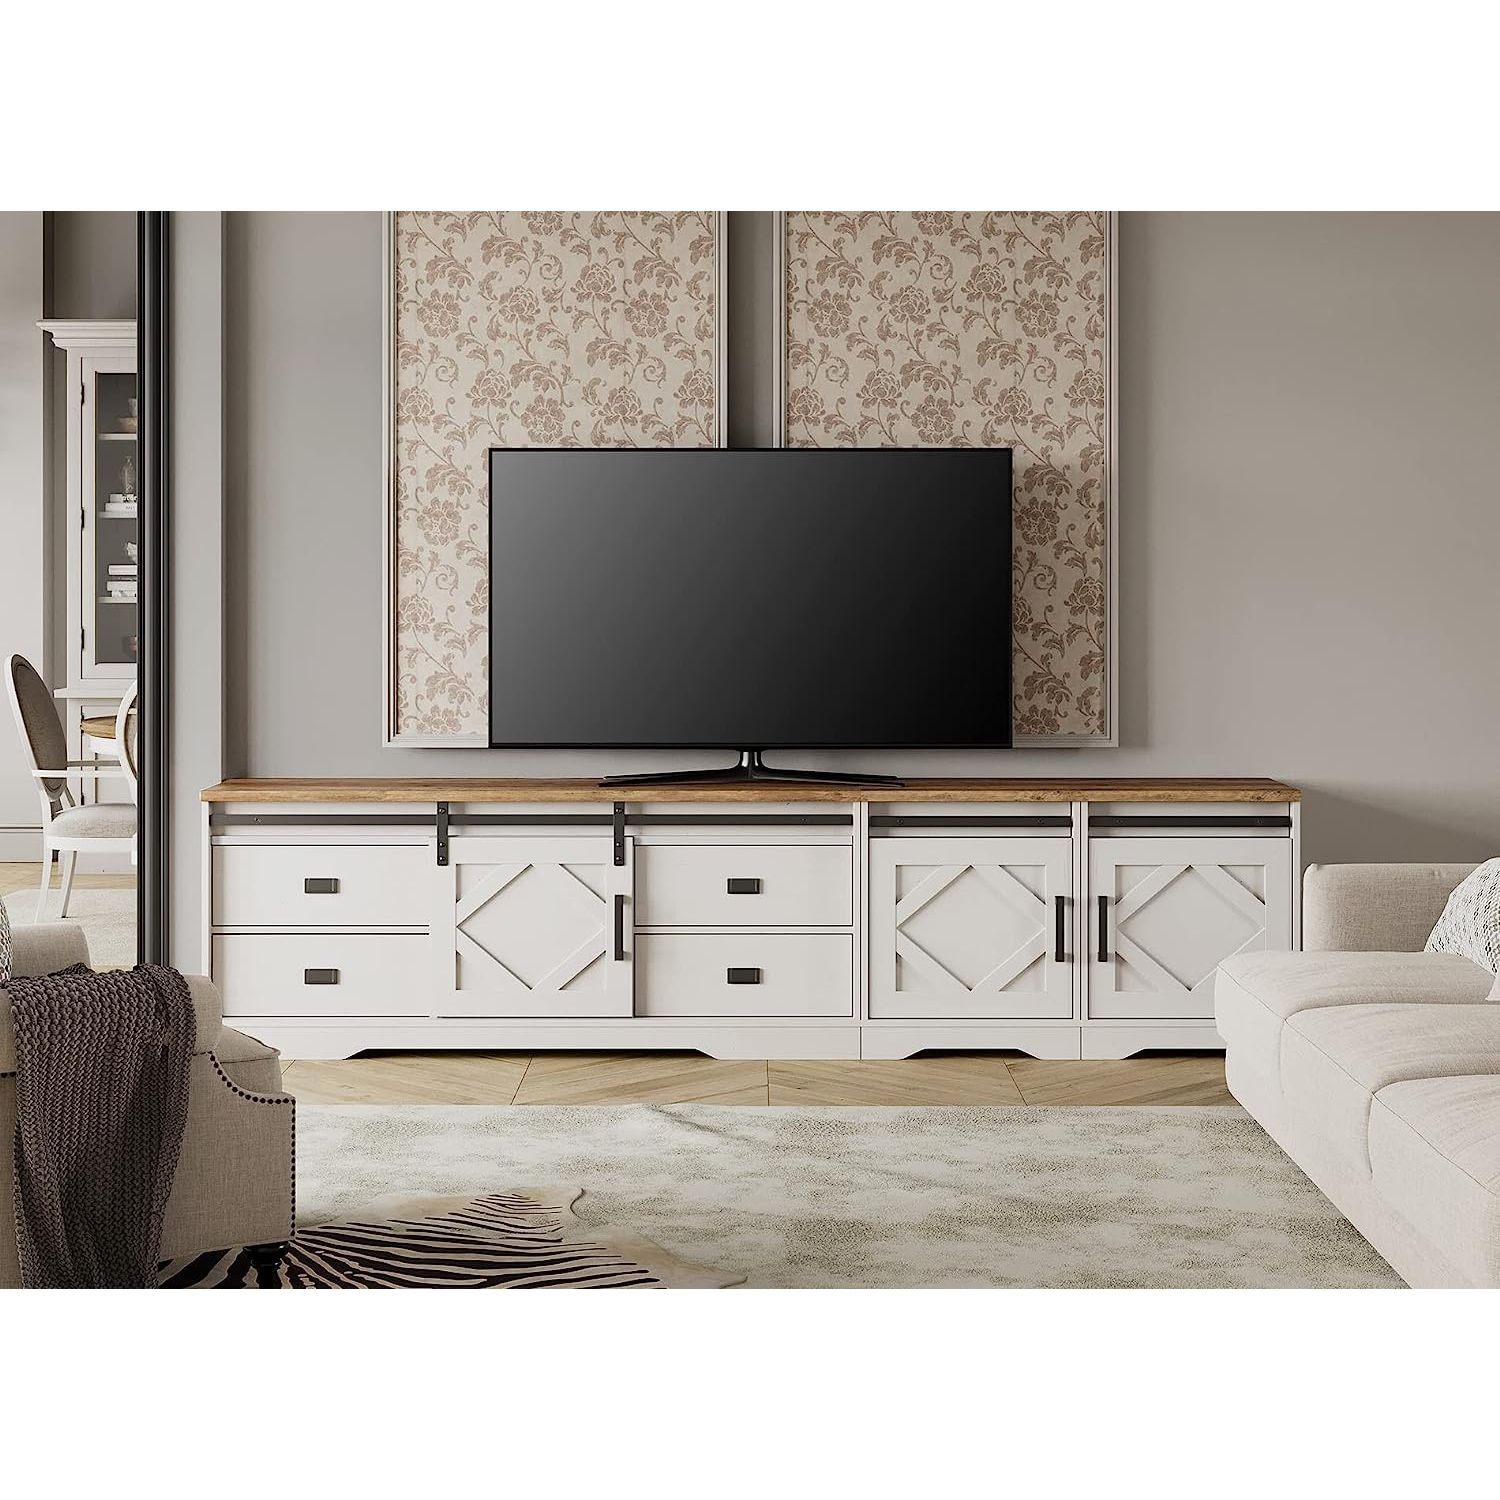 Wampat Modern Farmhouse Tv Stand For Up To 110" Tvs Wood Entertainment  Center Cabinet With Drawers And Adjustable Shelf For Living Room, Cream  White | Best Buy Canada For 110" Tvs Wood Tv Cabinet With Drawers (View 7 of 15)